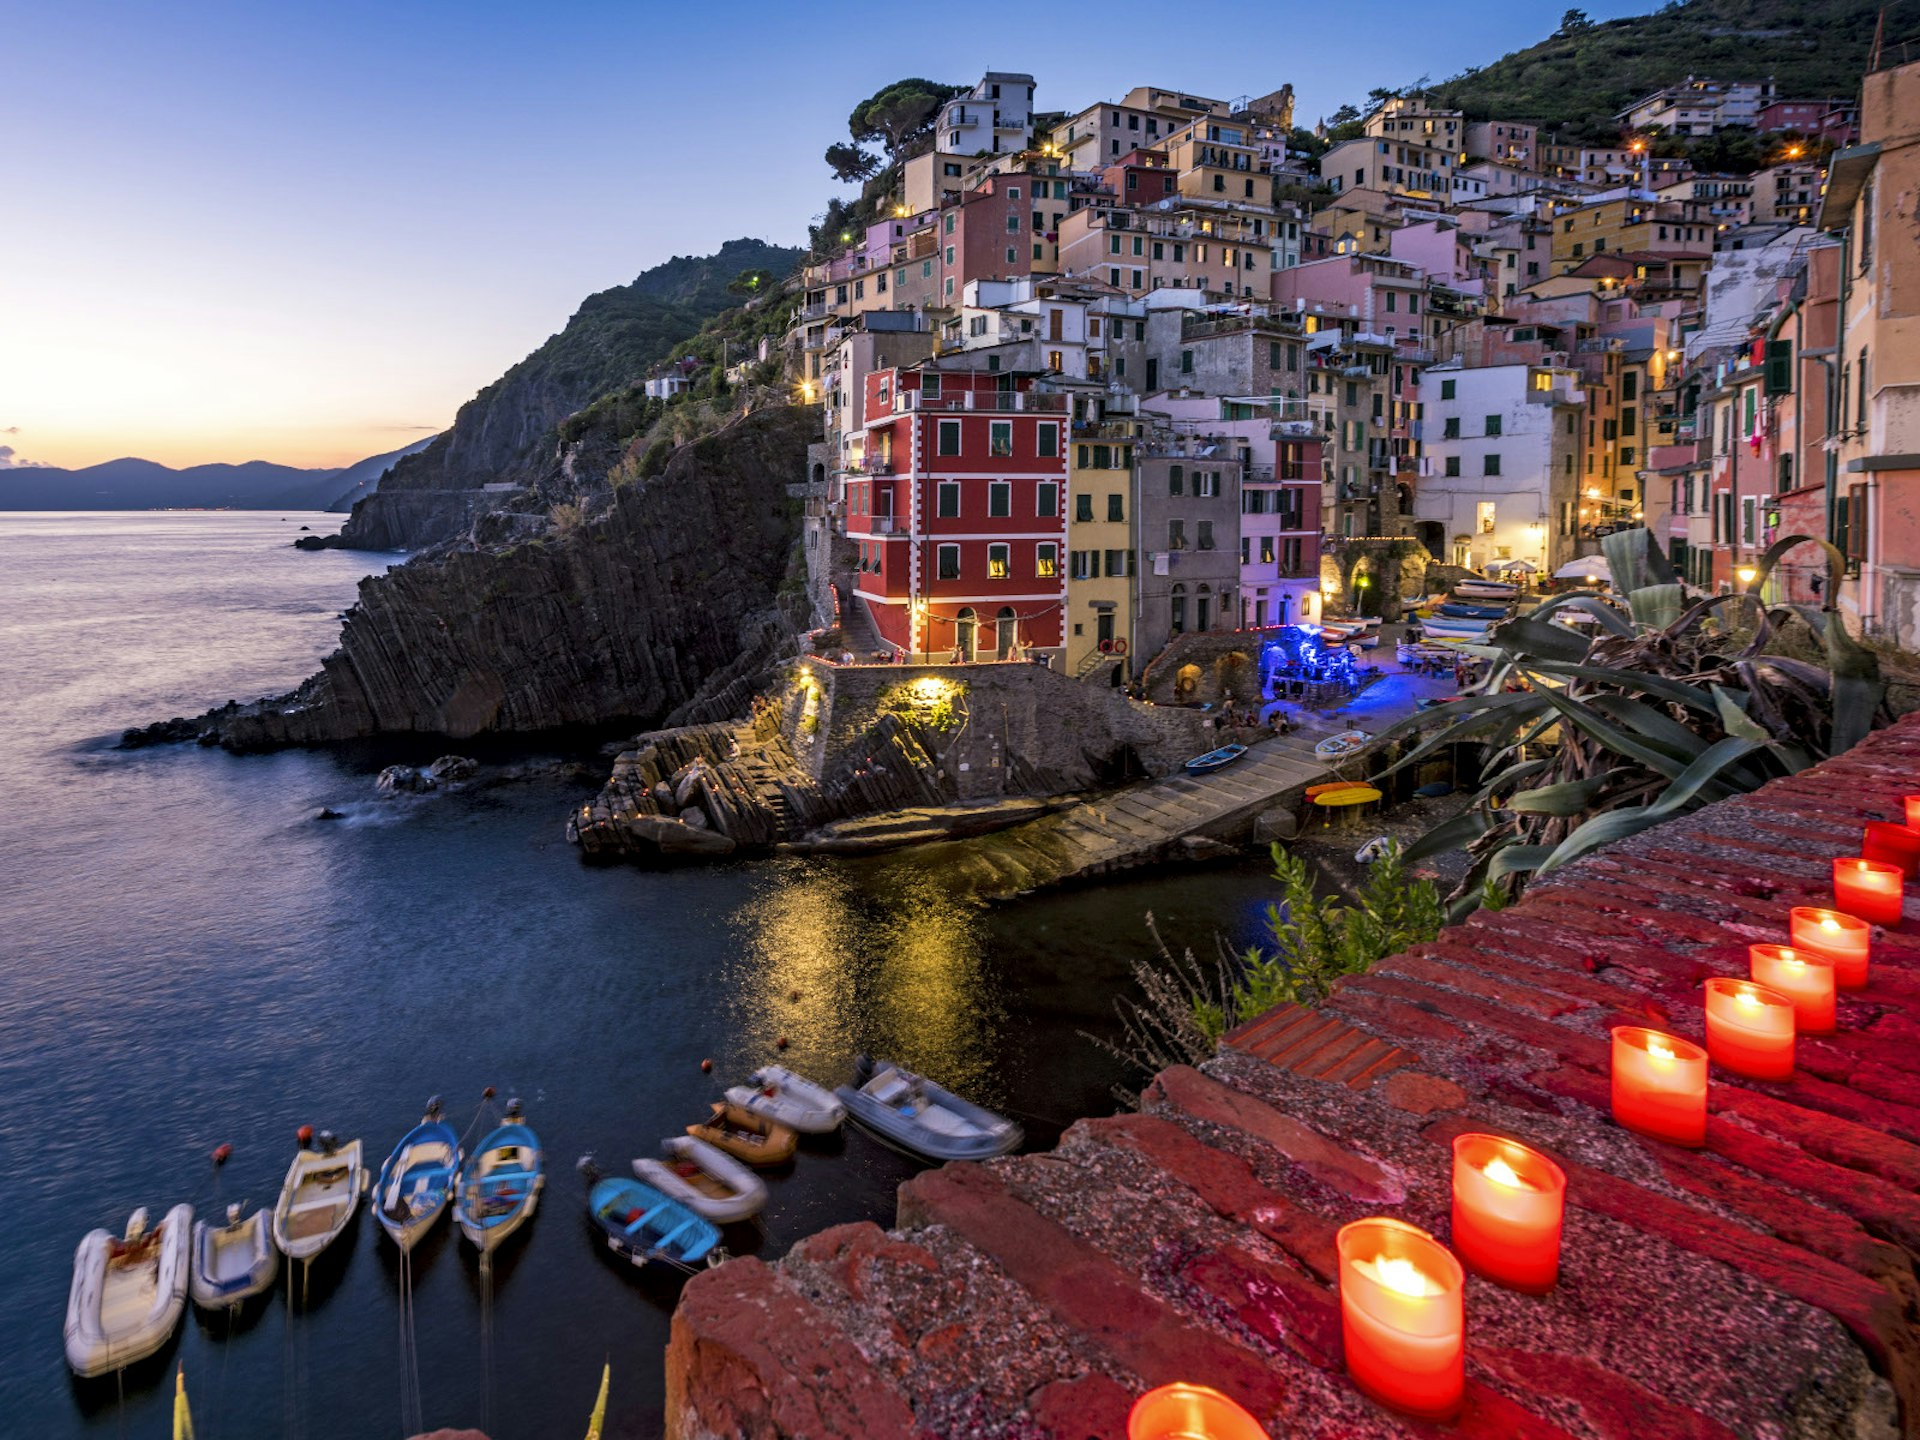 Riomaggiore, with brightly coloured buildings on the rocky hillside, and a handful of small boats docked in the harbour. Candles are lit along the wall in the foreground